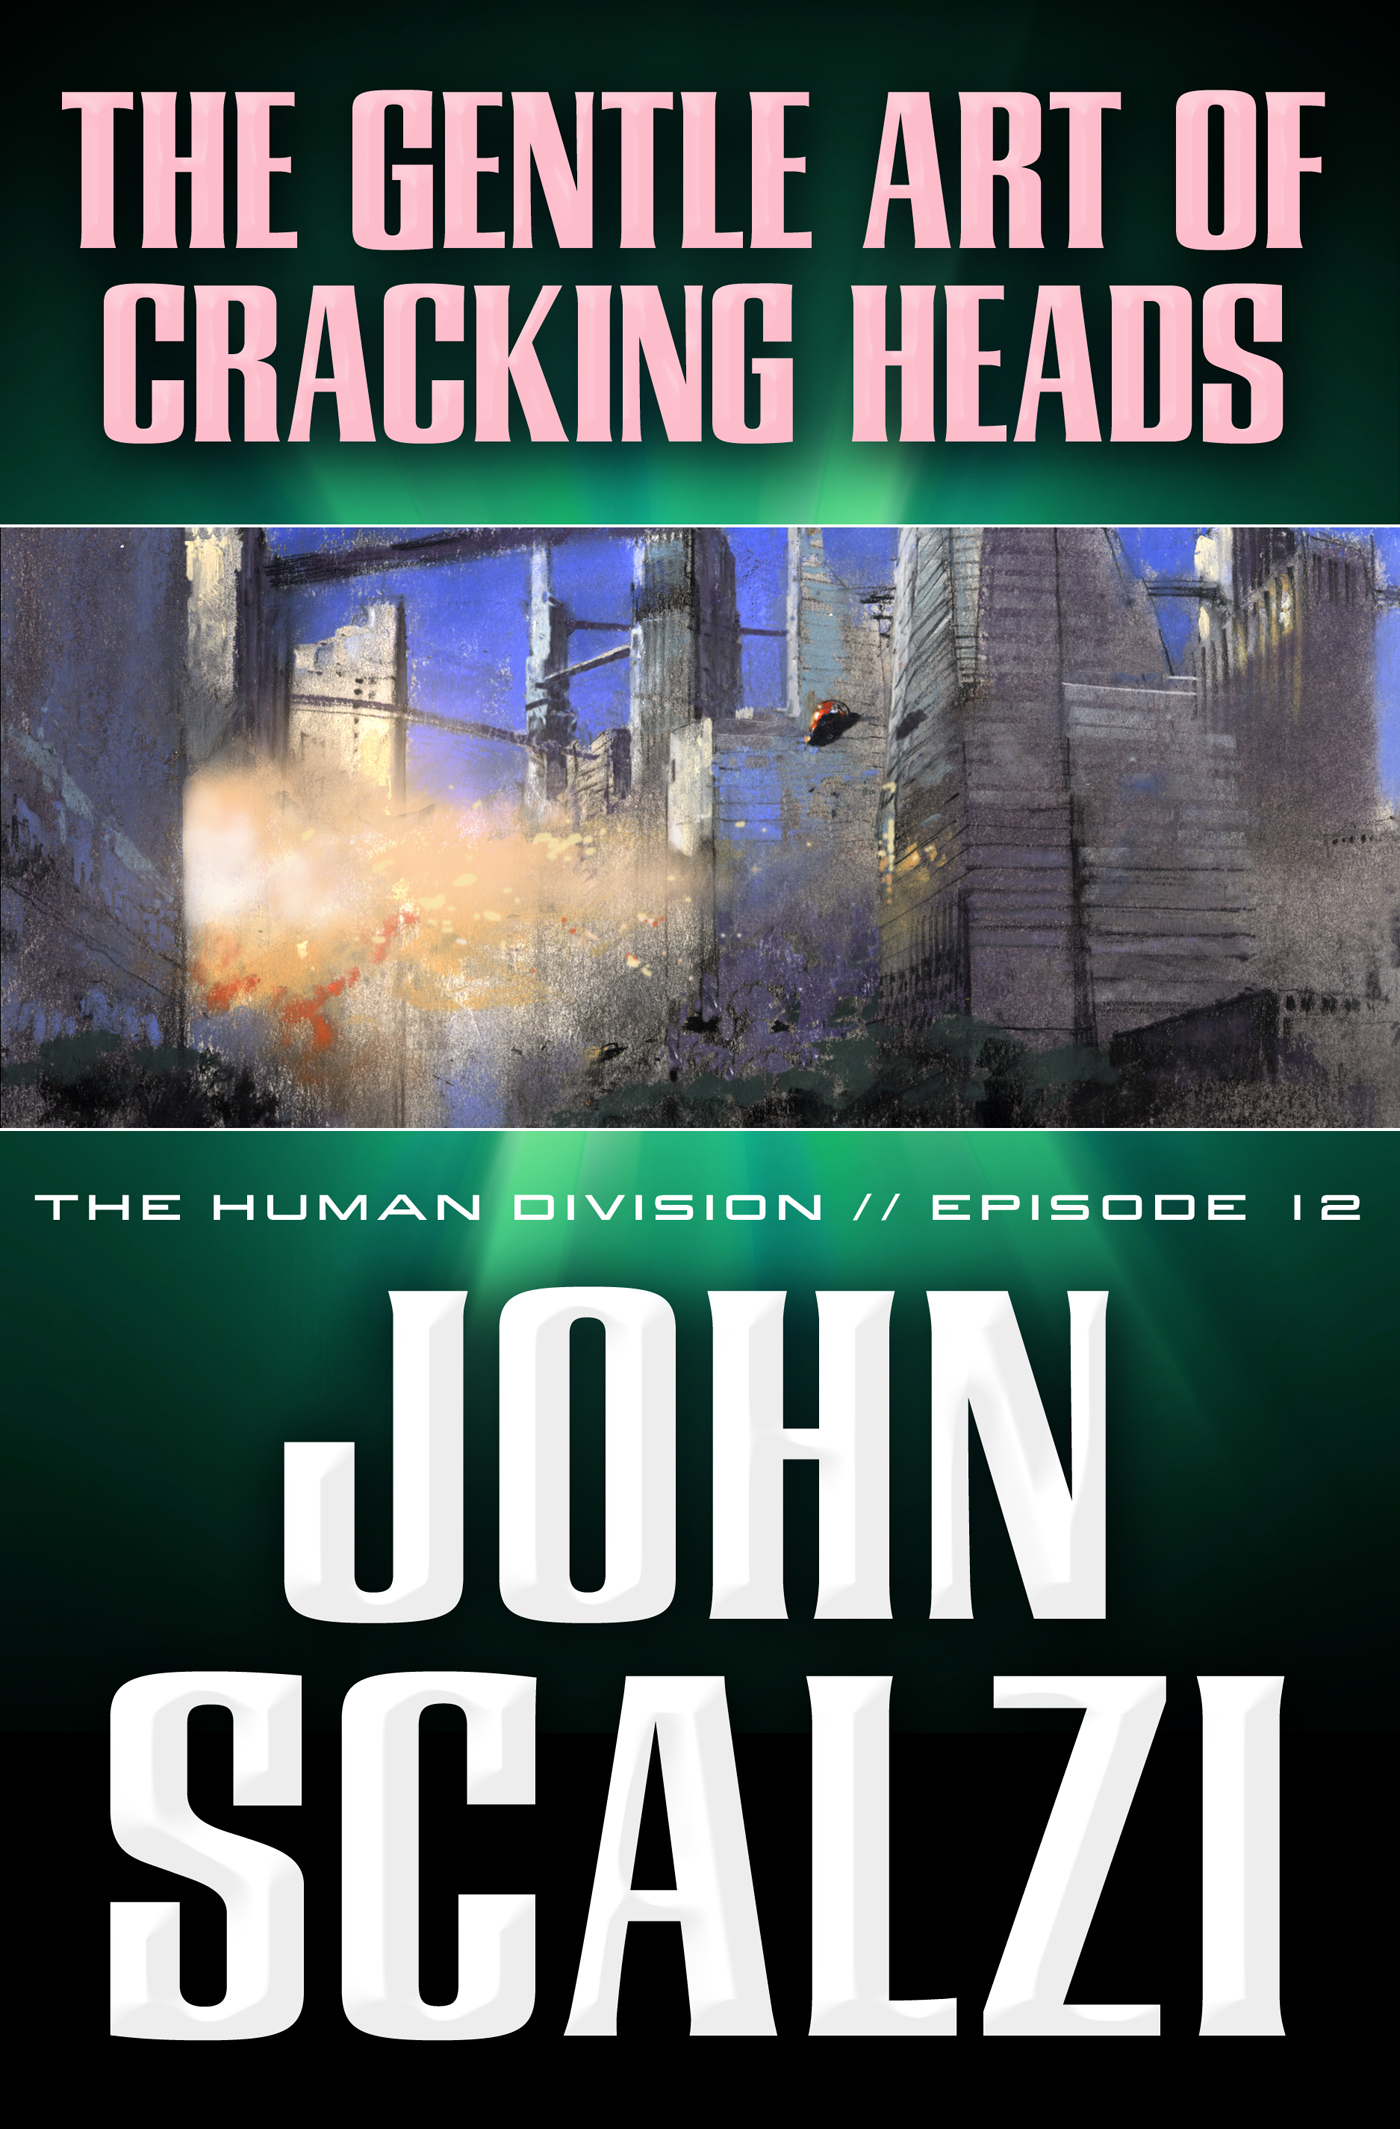 The Human Division #12: The Gentle Art of Cracking Heads by John Scalzi